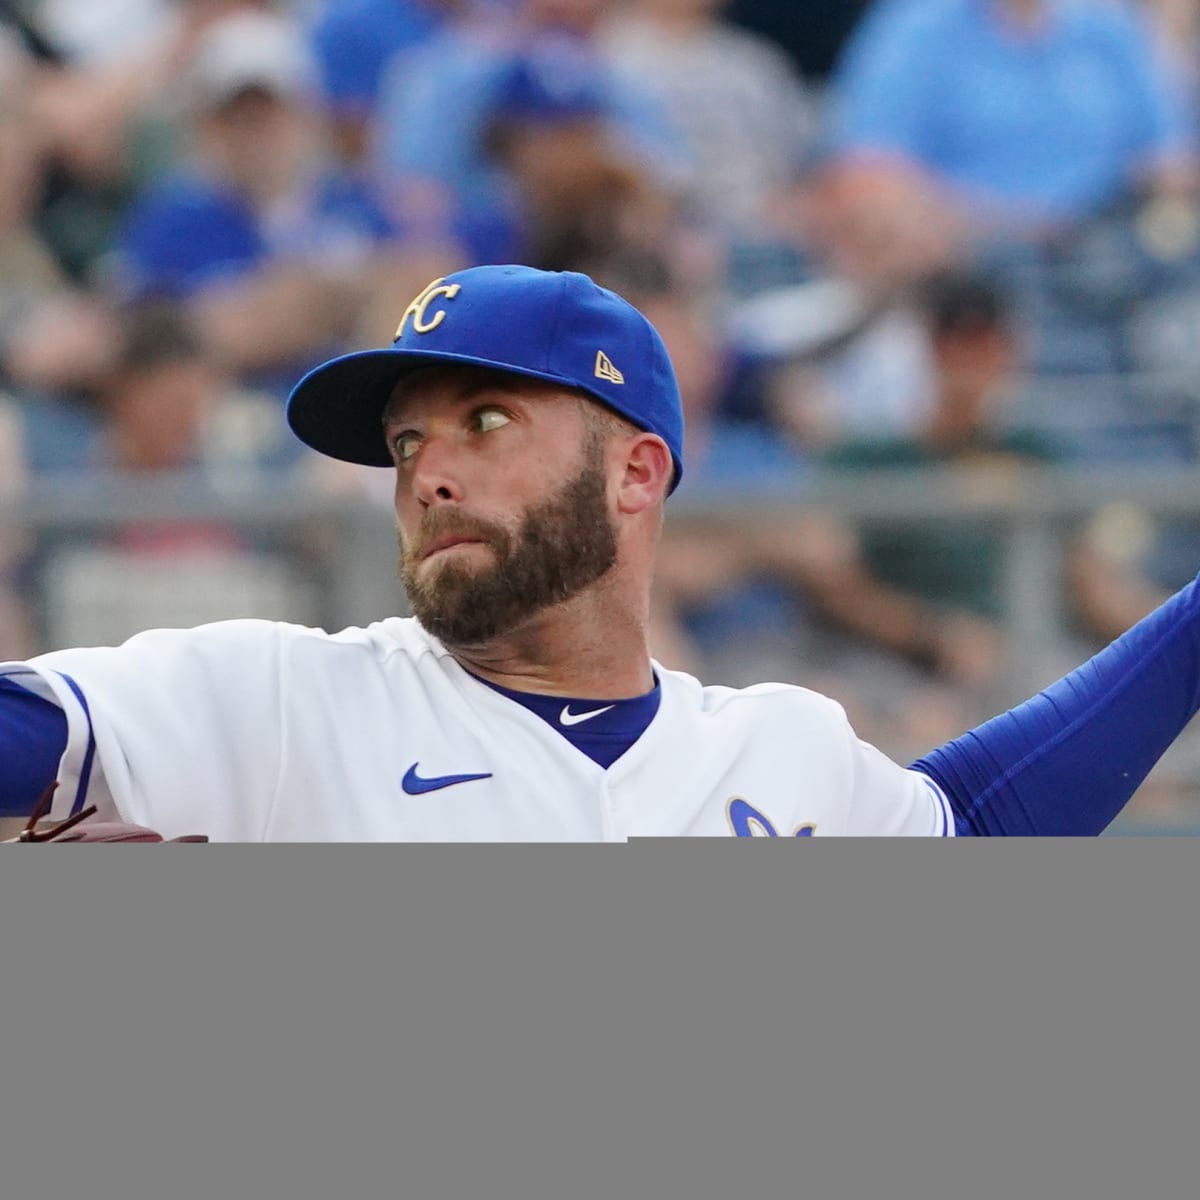 Dodgers News: Danny Duffy May Require Surgery Or He May Opt To Retire - Inside the Dodgers | News, Rumors, Videos, Schedule, Roster, Salaries More